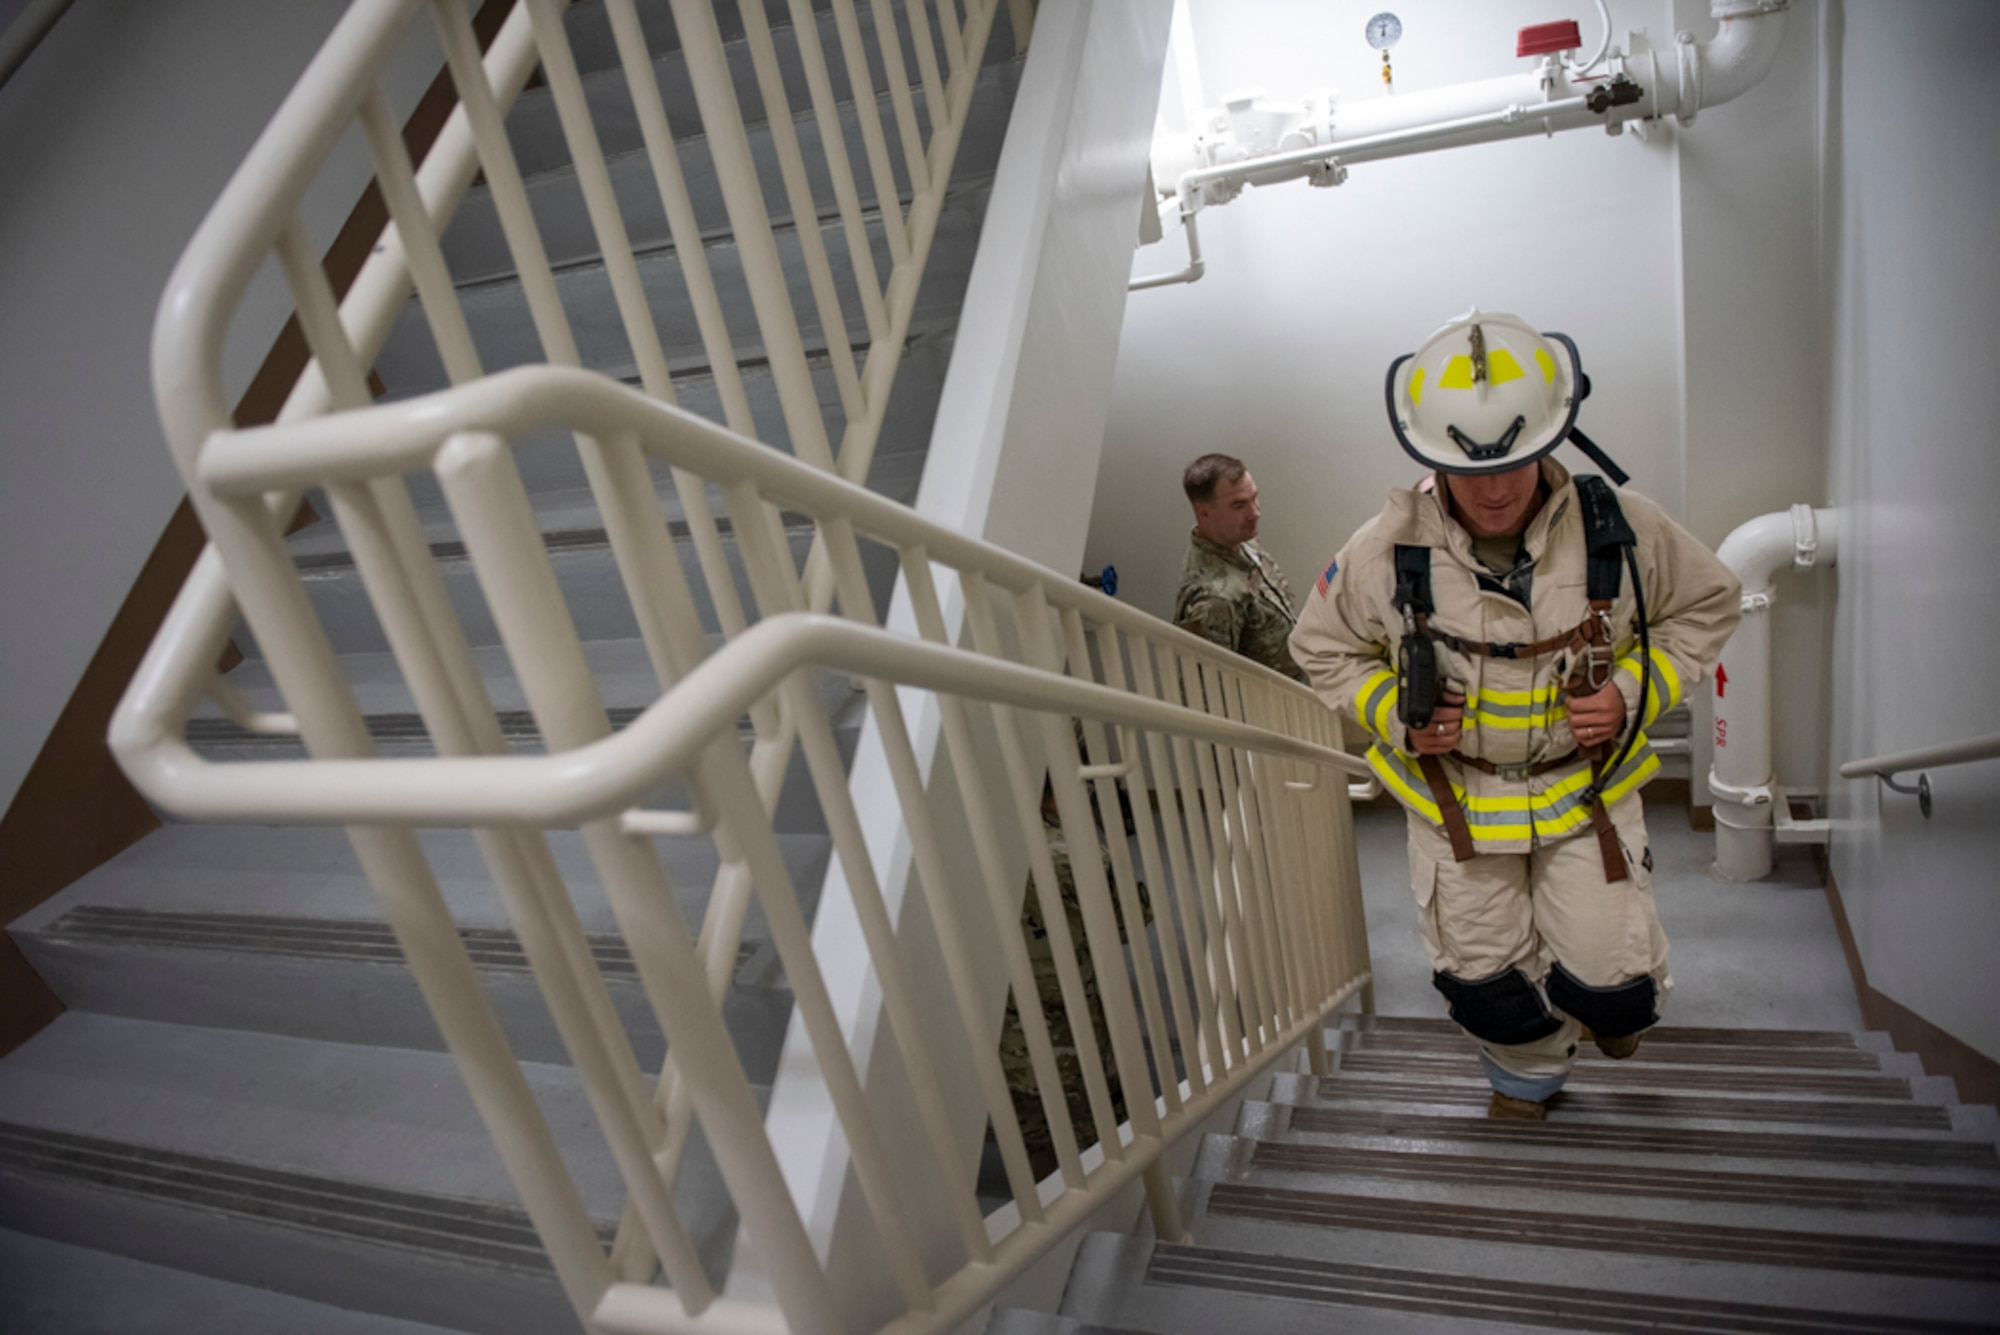 Col. Joshua Wood, 51st Fighter Wing commander, climbs 110 flights of stairs wearing fire fighter equipment during a 20th Anniversary 9/11 Remembrance Ceremony at Osan Air Base, Republic of Korea, Sept. 11, 2021.